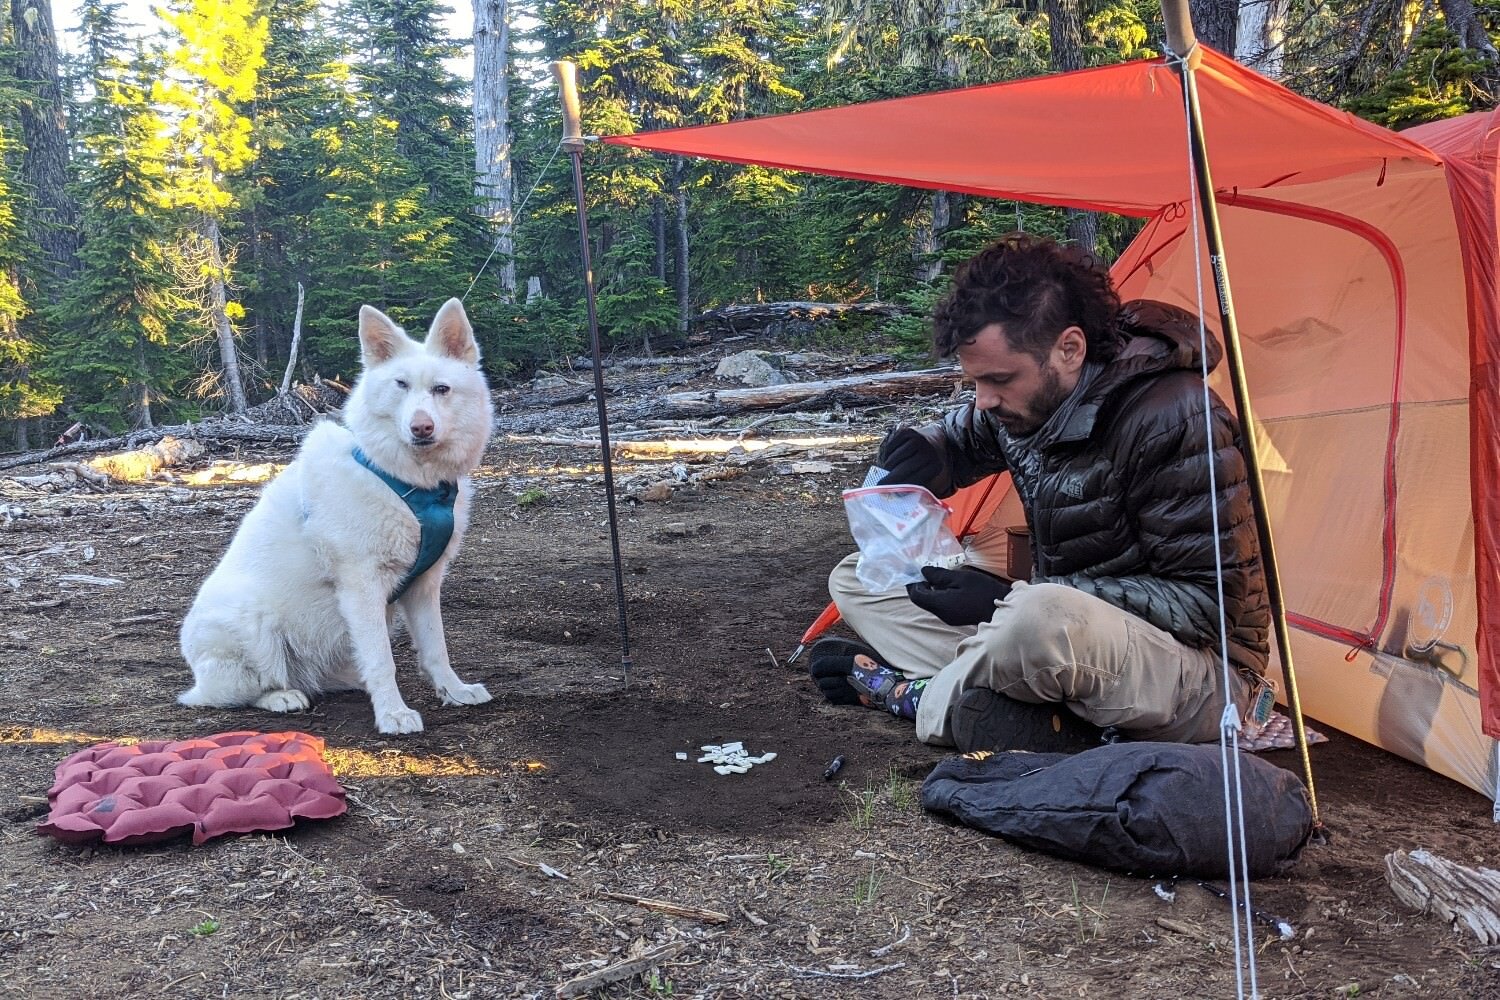 a dog sitting in a campsite next to a hiker under a tent awning